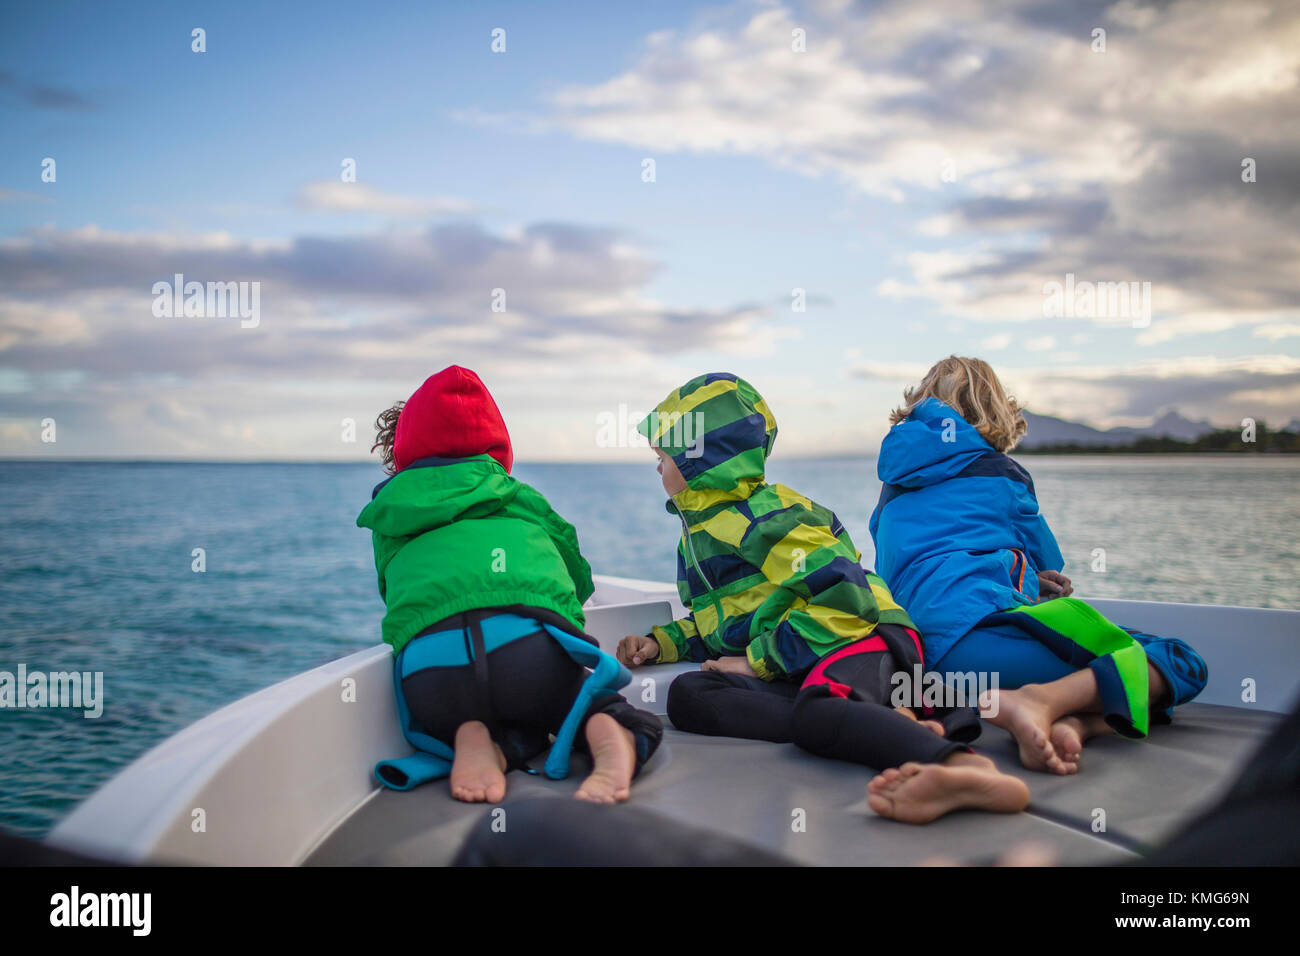 Children admiring seascape from boat Stock Photo